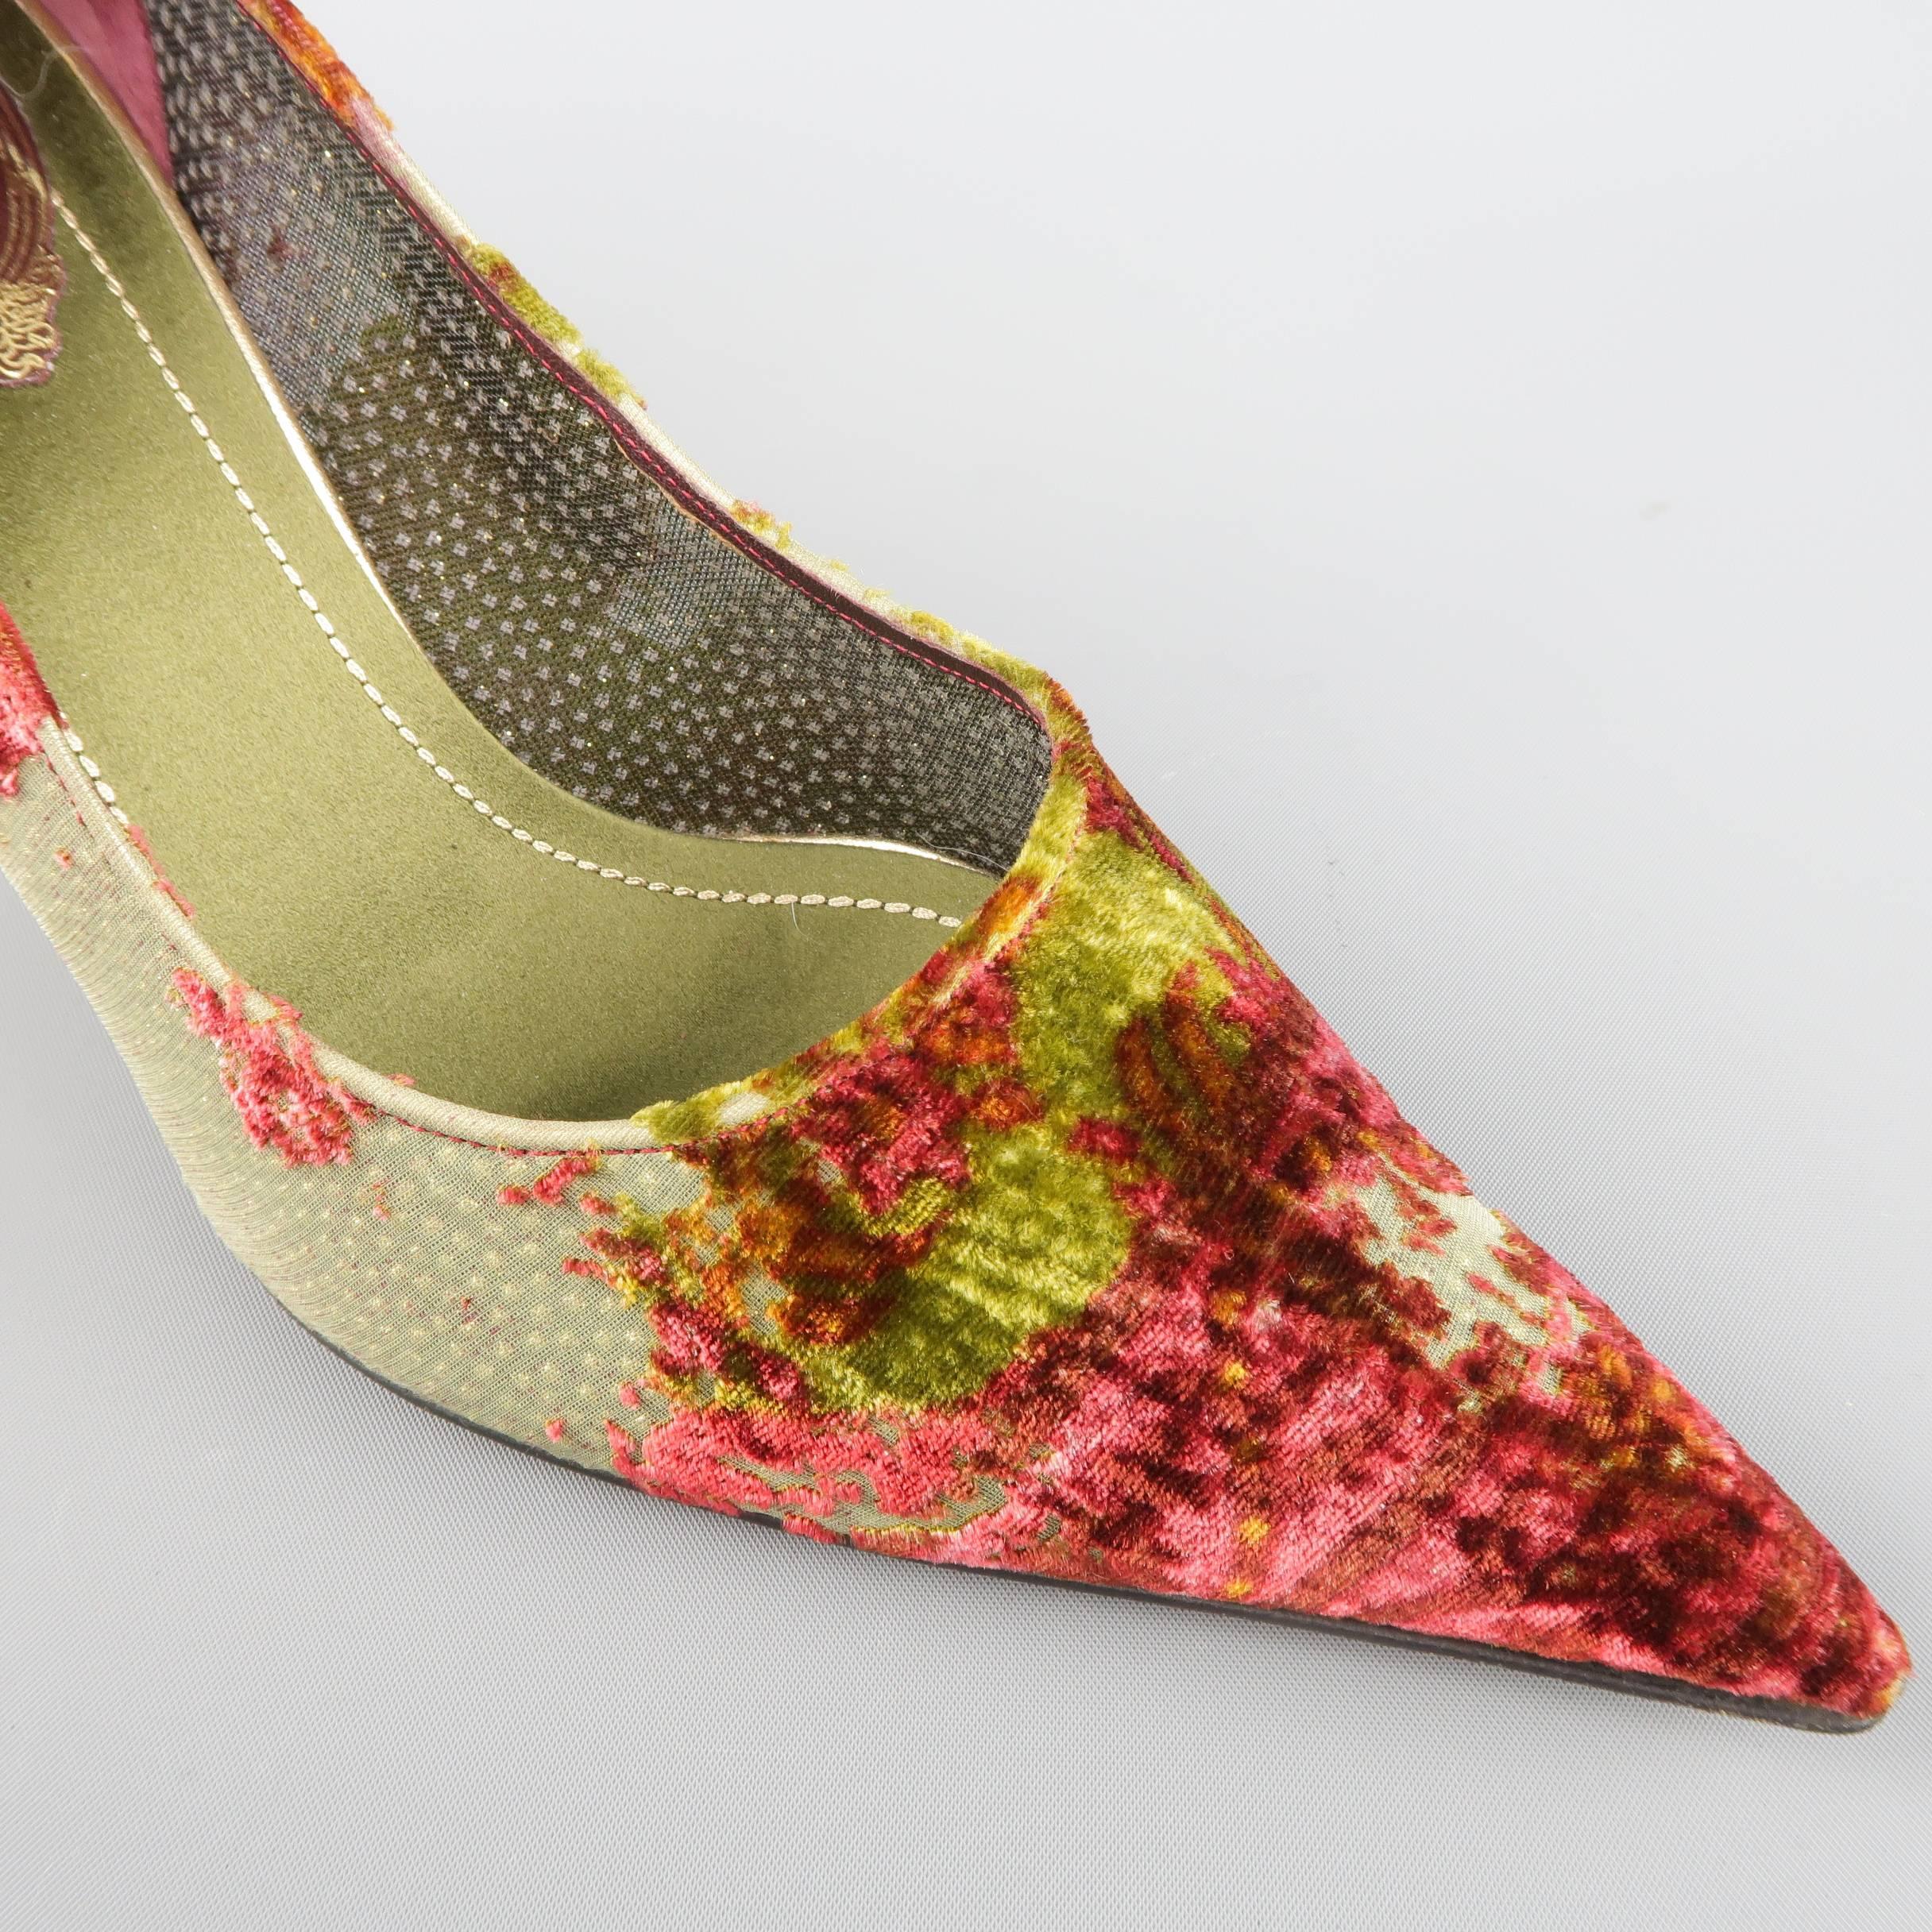 RENE CAOVILLA pumps come in a unique baroque print burnout silk velvet material with hues of burgundy, green, copper, and purple with a pointed toe and iridescent, oil slick purple heel. Made in Italy,
 
Excellent Pre-Owned Condition.
Marked: IT 40
